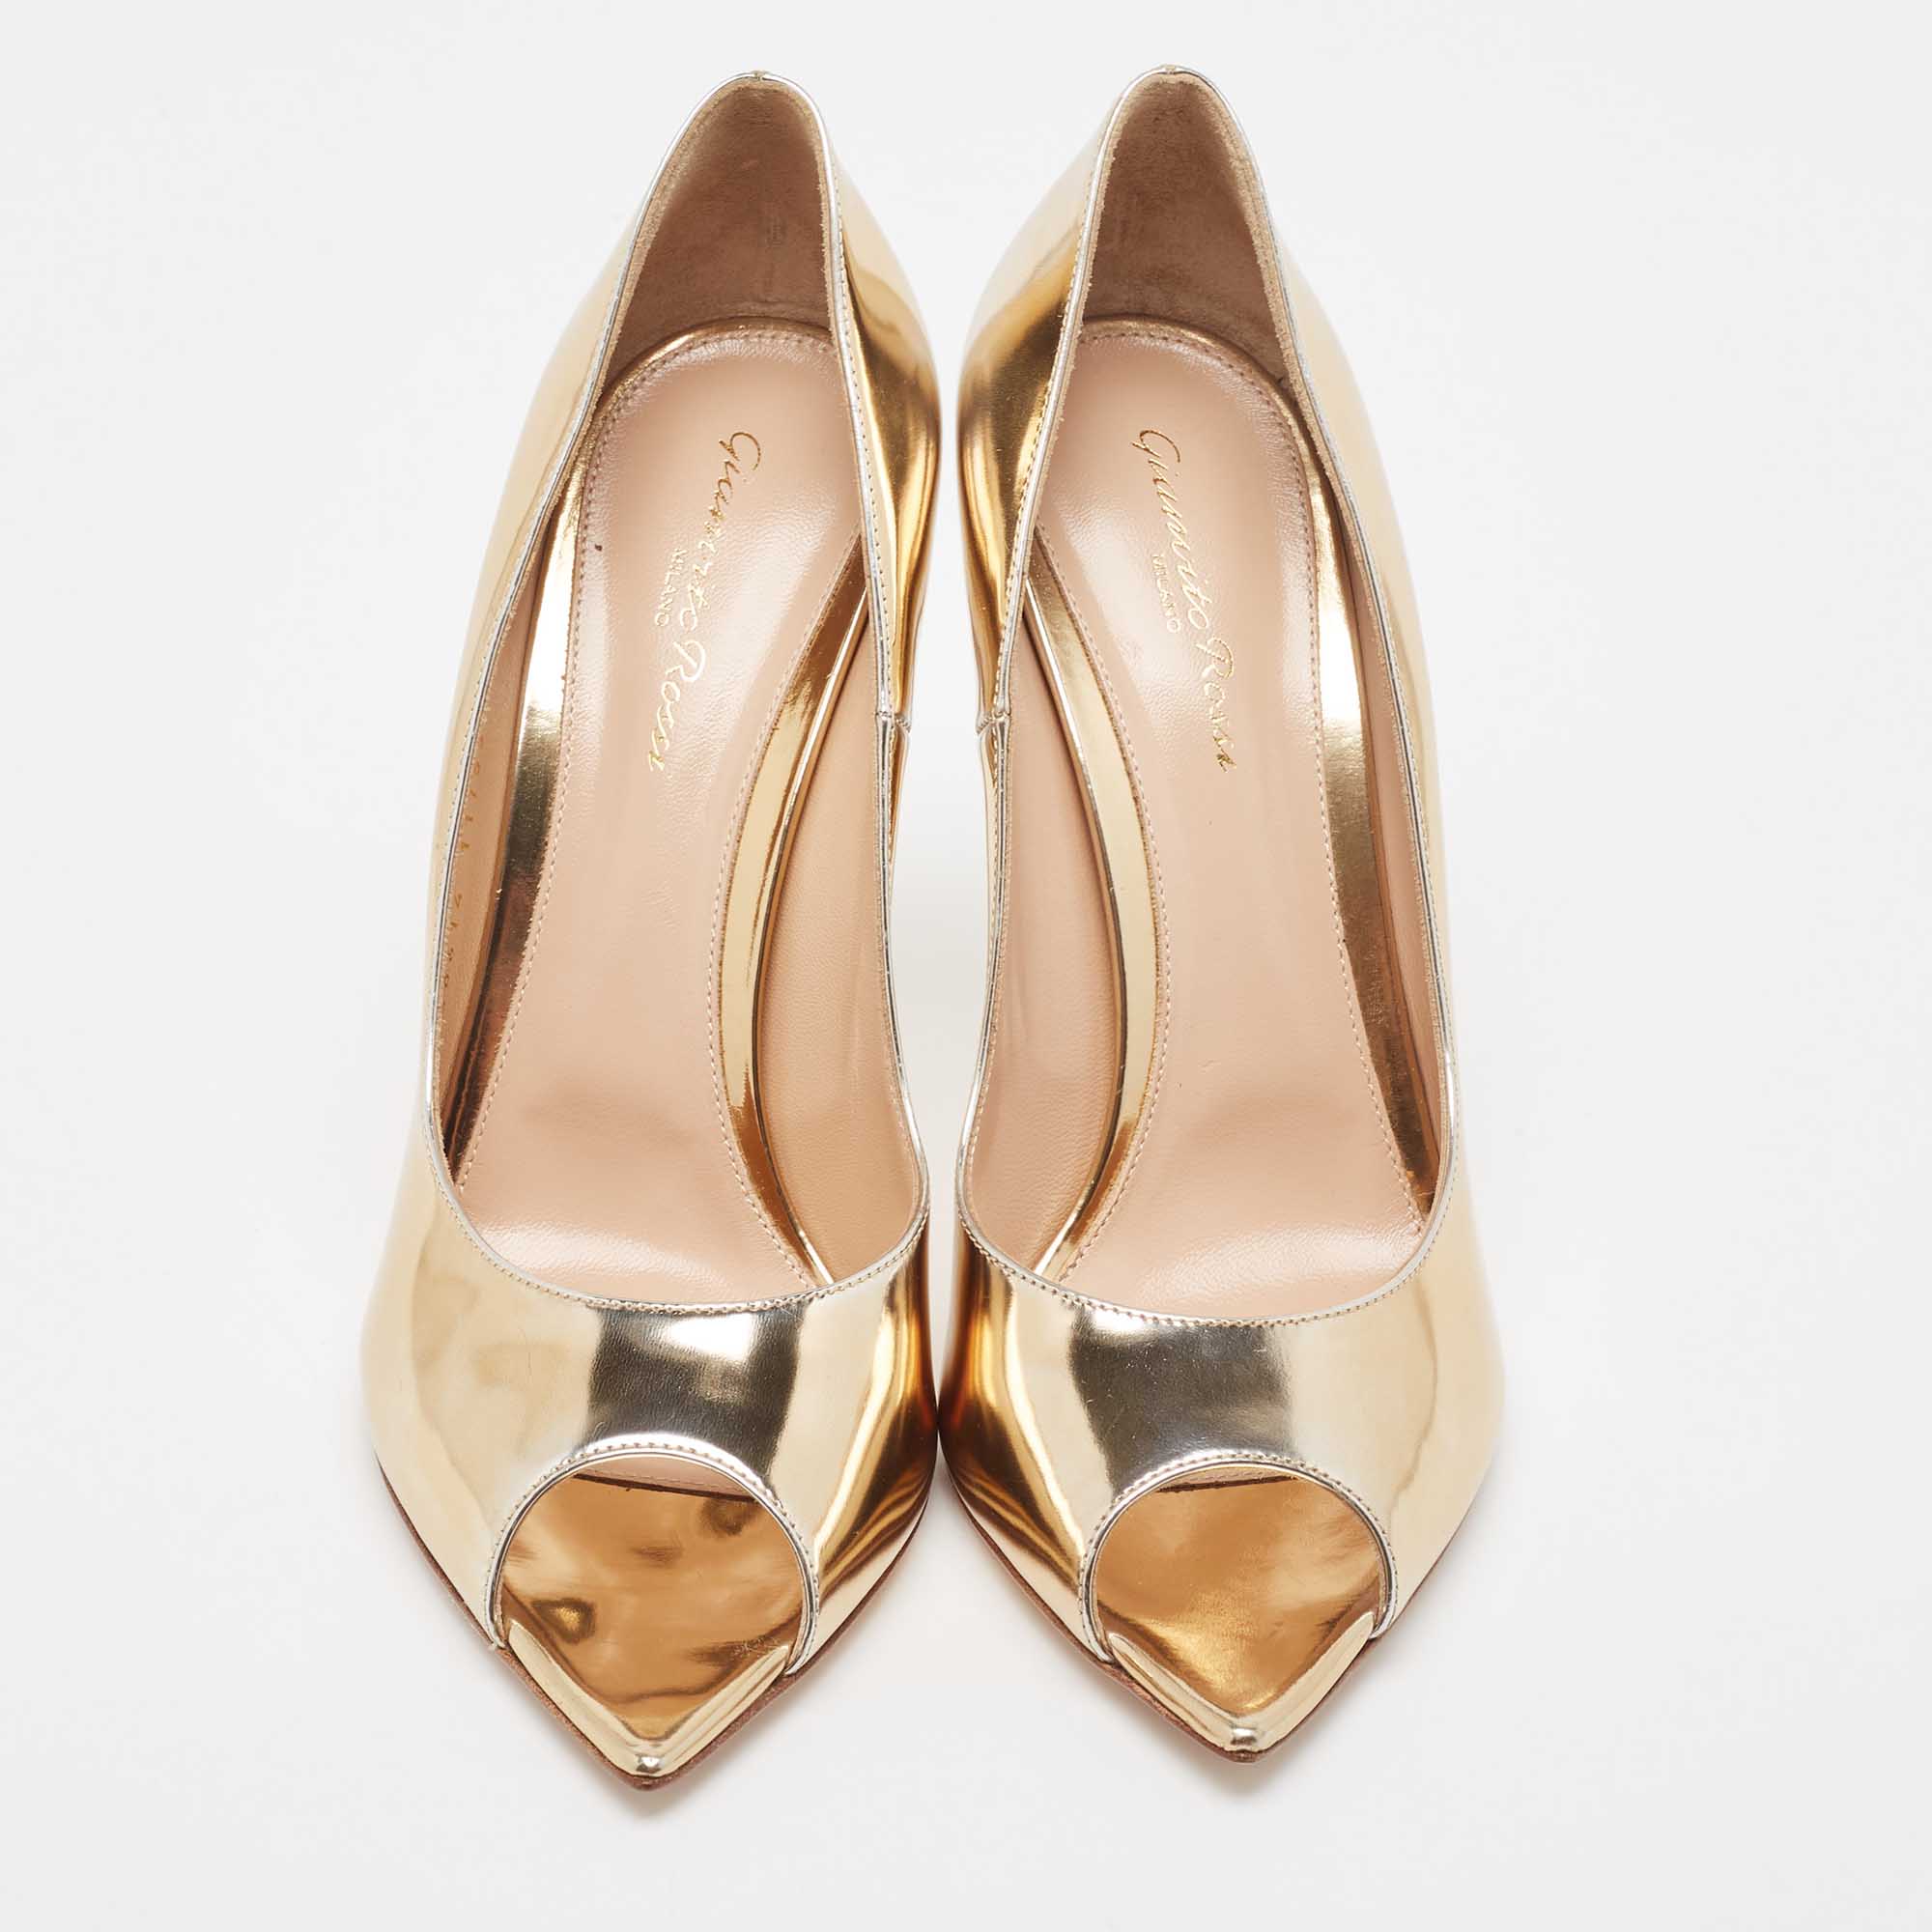 Gianvito Rossi Gold Leather Open Toe Pumps Size 41